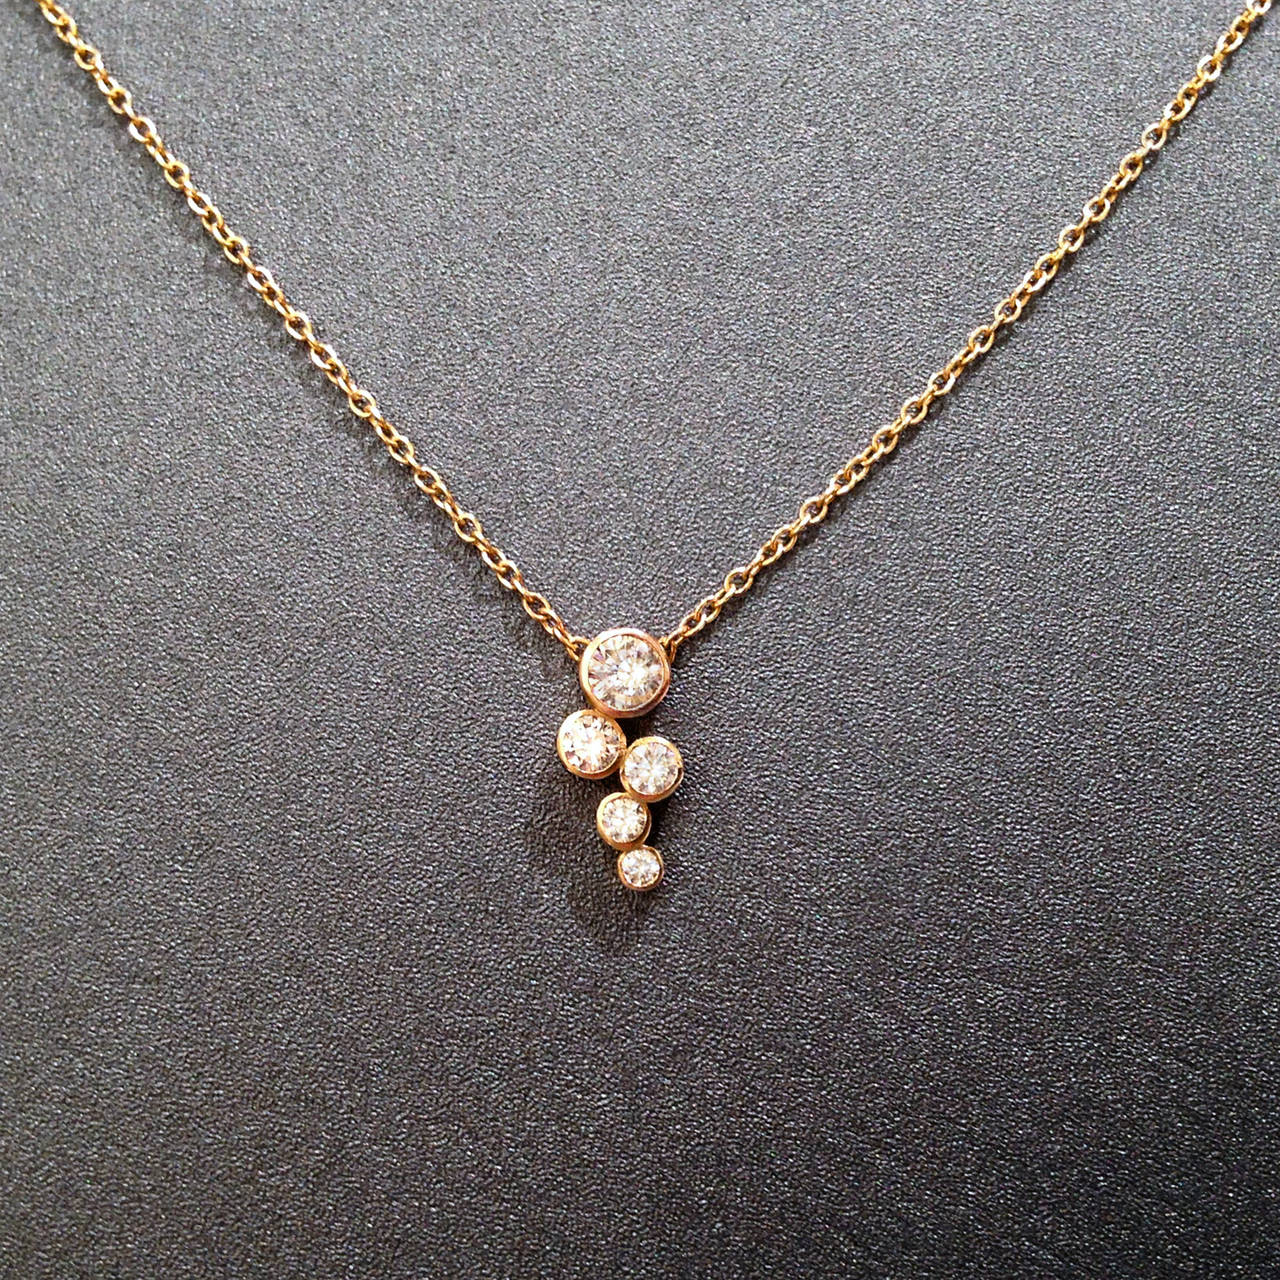 Handcrafted Bubbles Necklace on a 14k rose gold chain with the top round, brilliant-cut white diamond set in 14k rose gold and the lower four round brilliant-cut diamonds set in 14k yellow gold. 16.5